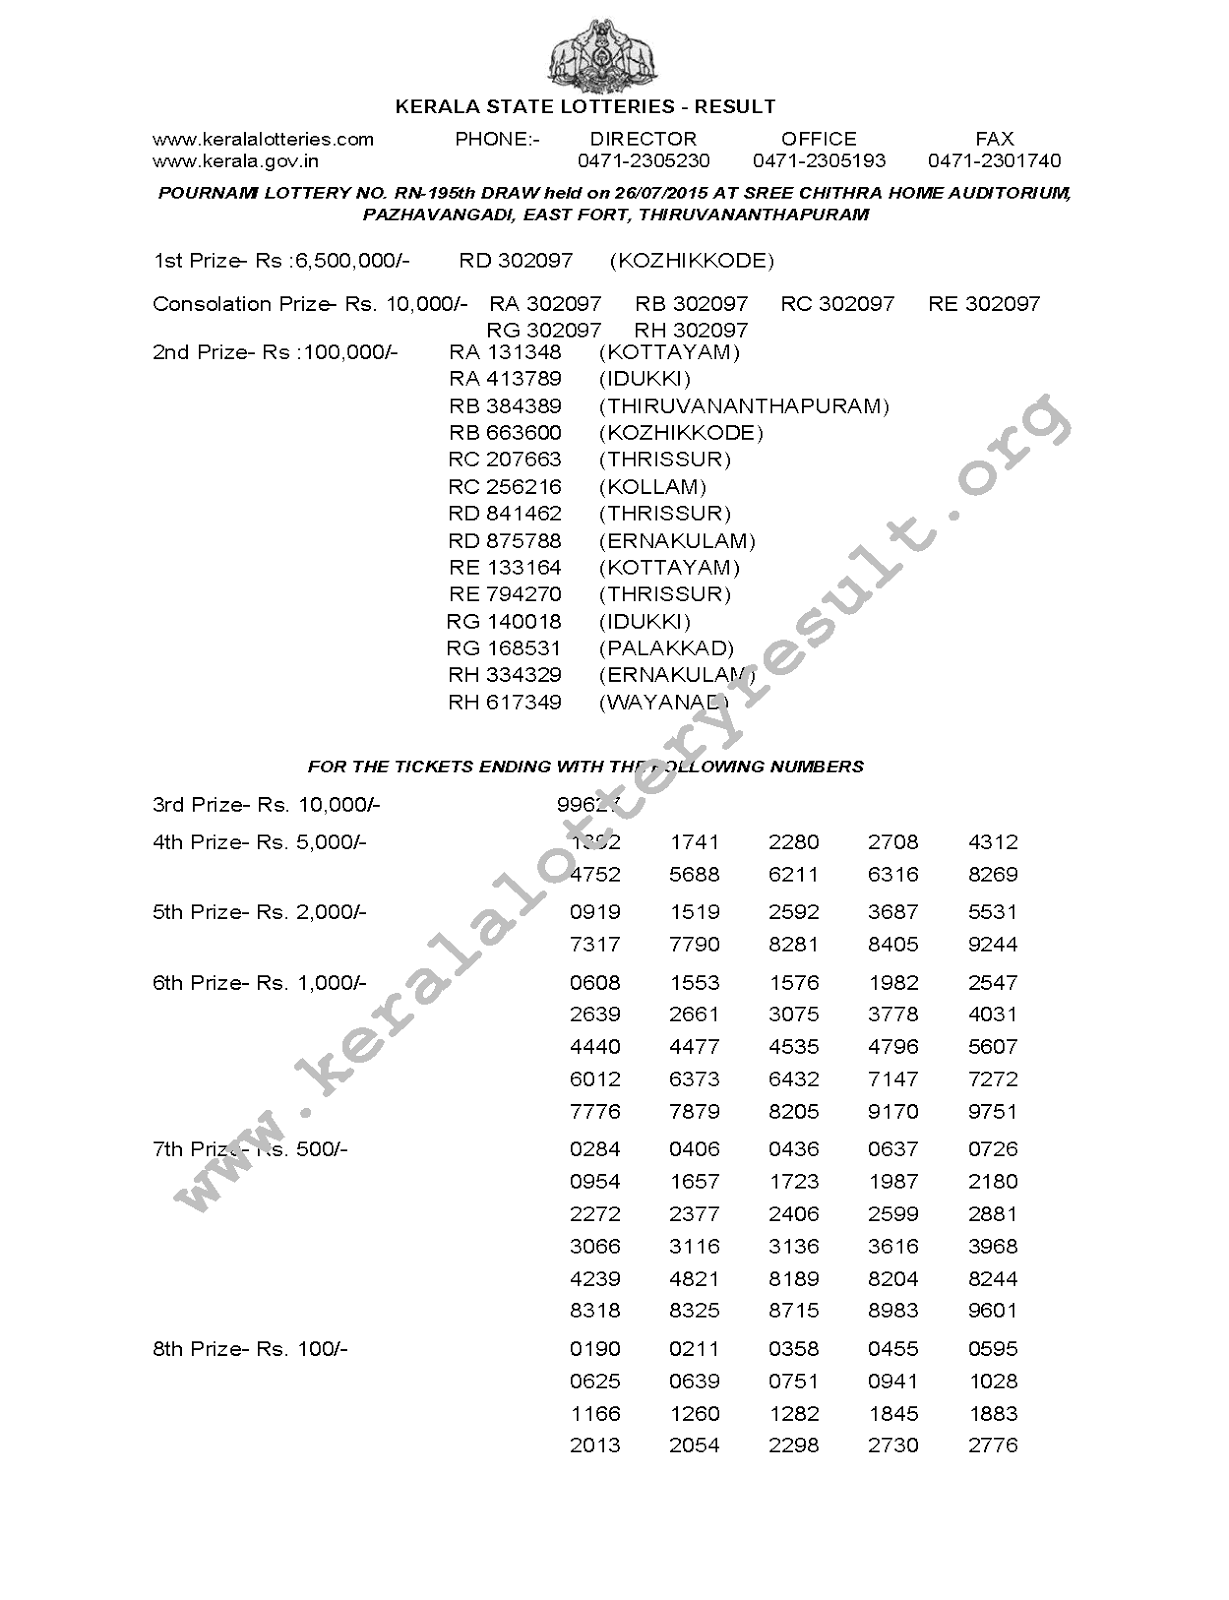 POURNAMI Lottery RN 195 Result 26-7-2015